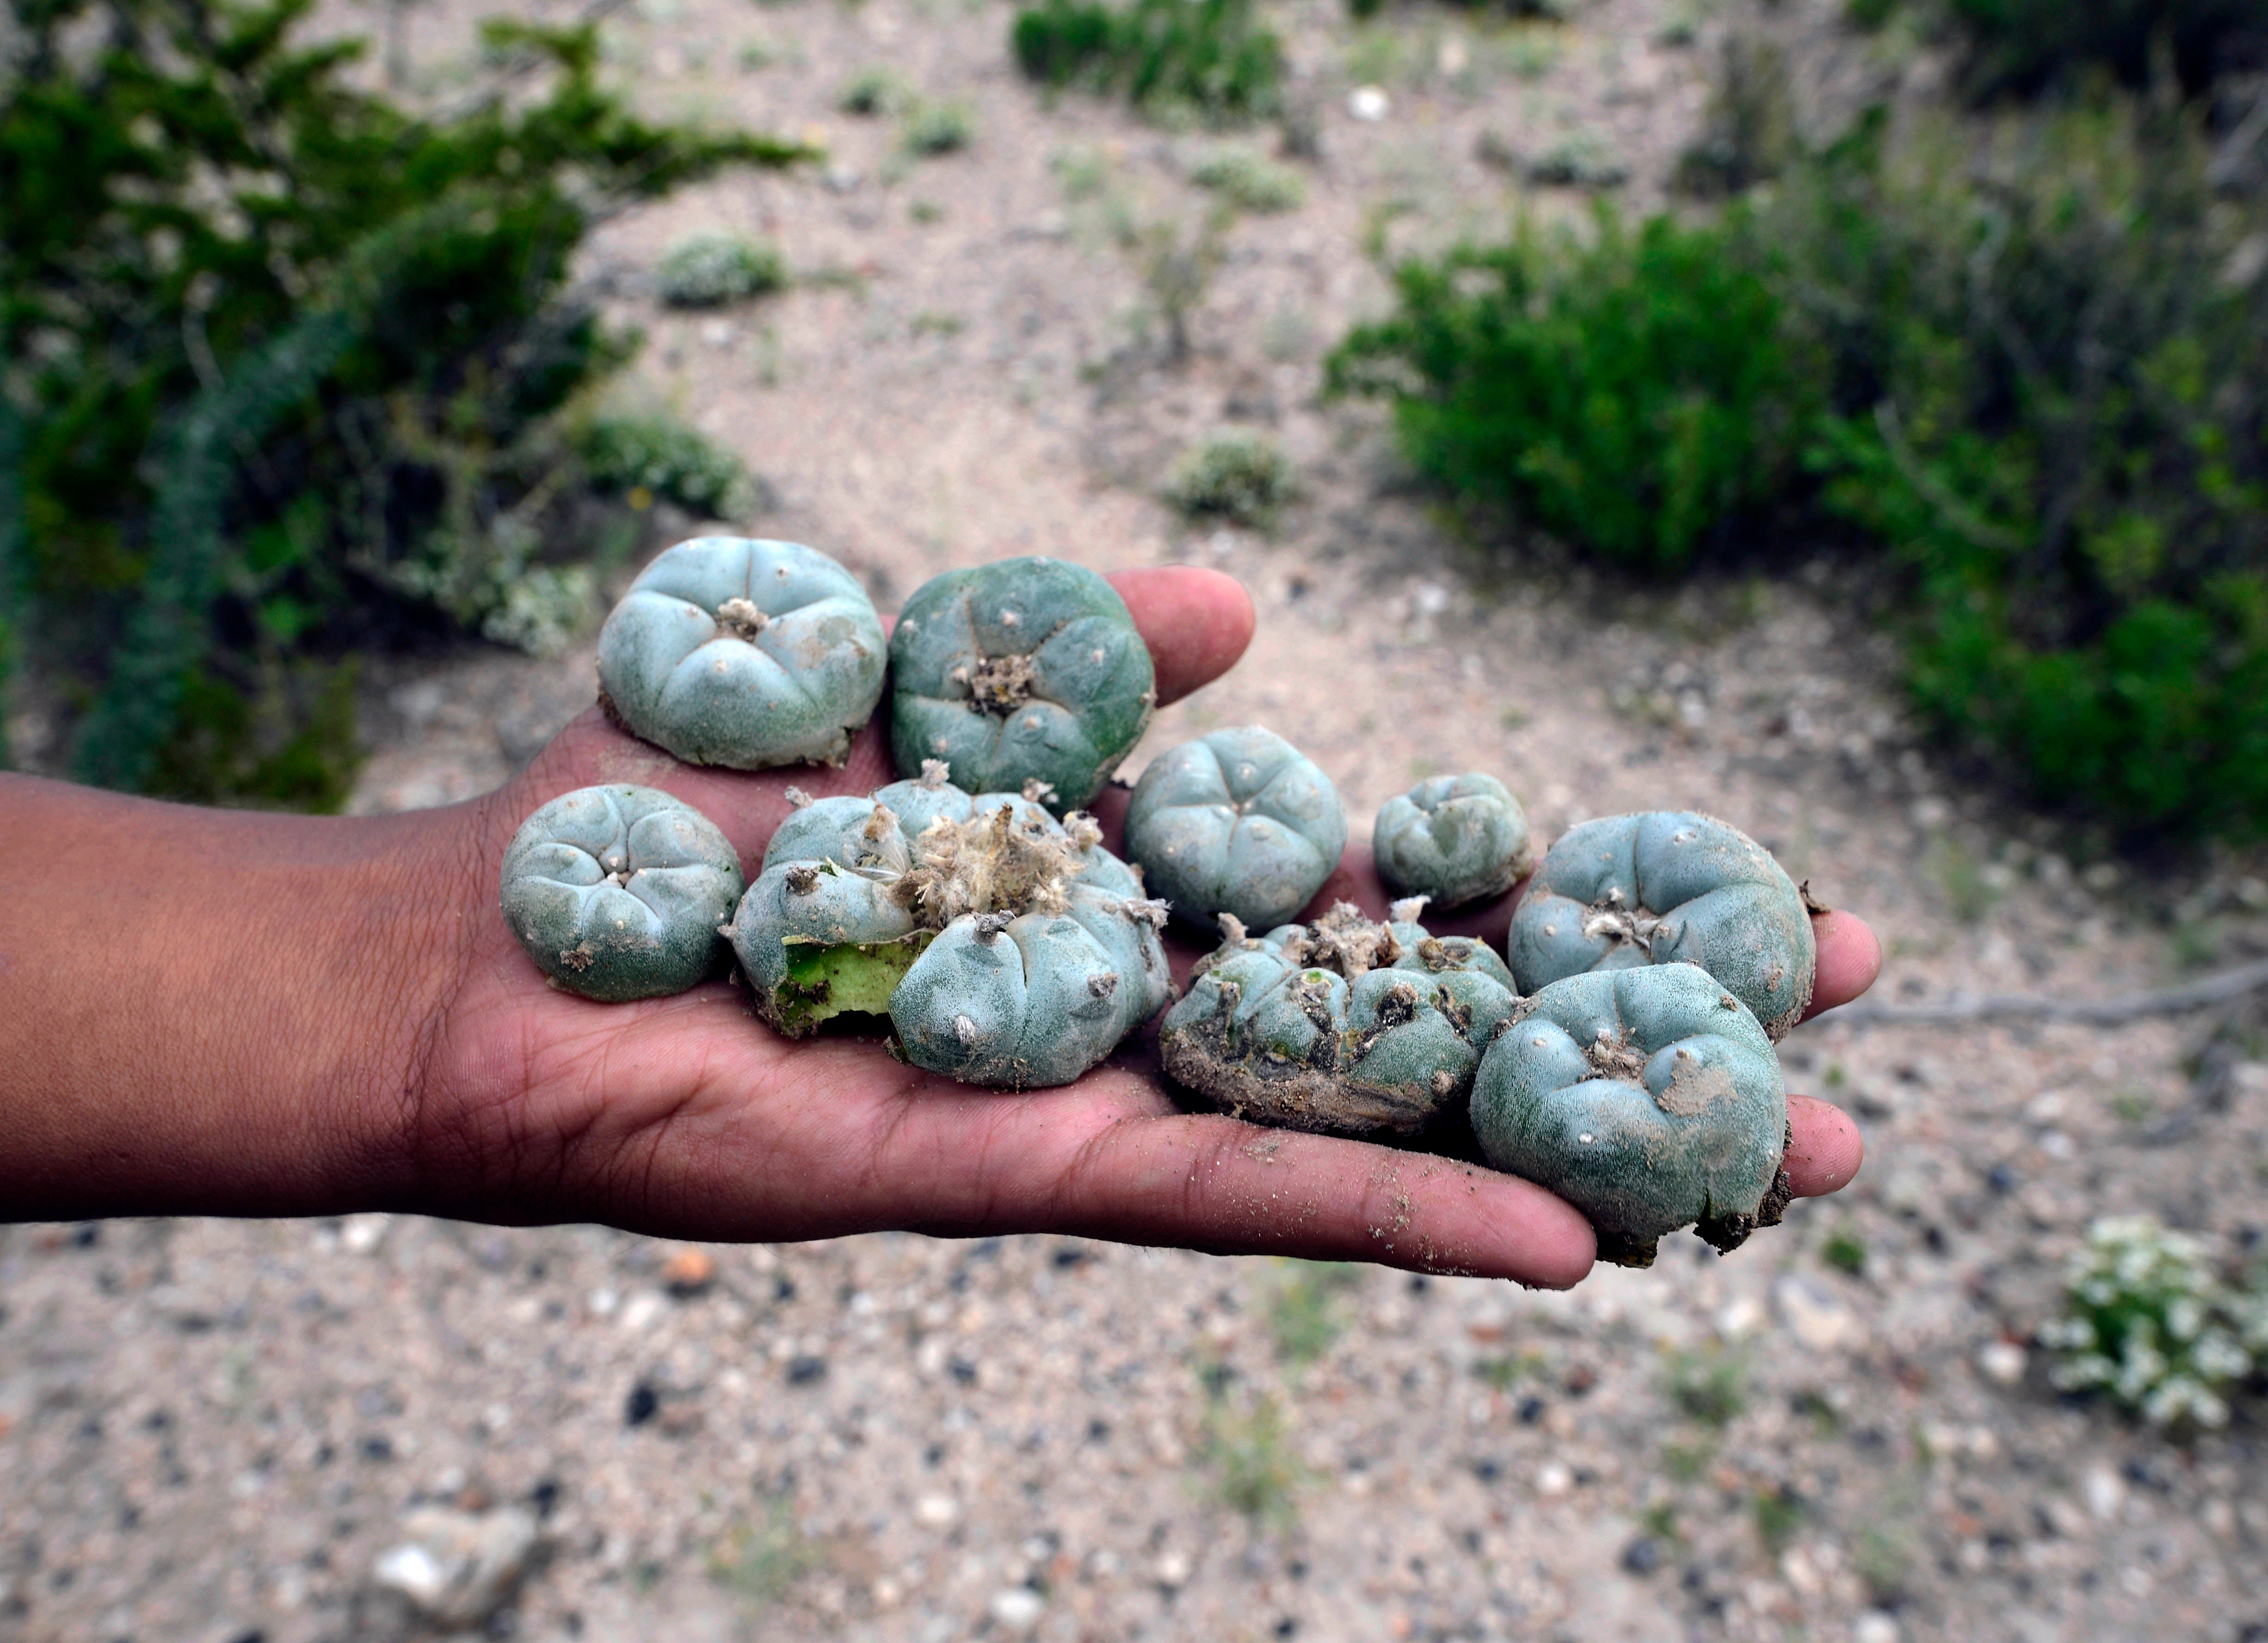 Mexican and foreign tourists go to the desert to try the peyote cactus, which has psychoactive alkaloids as mescaline